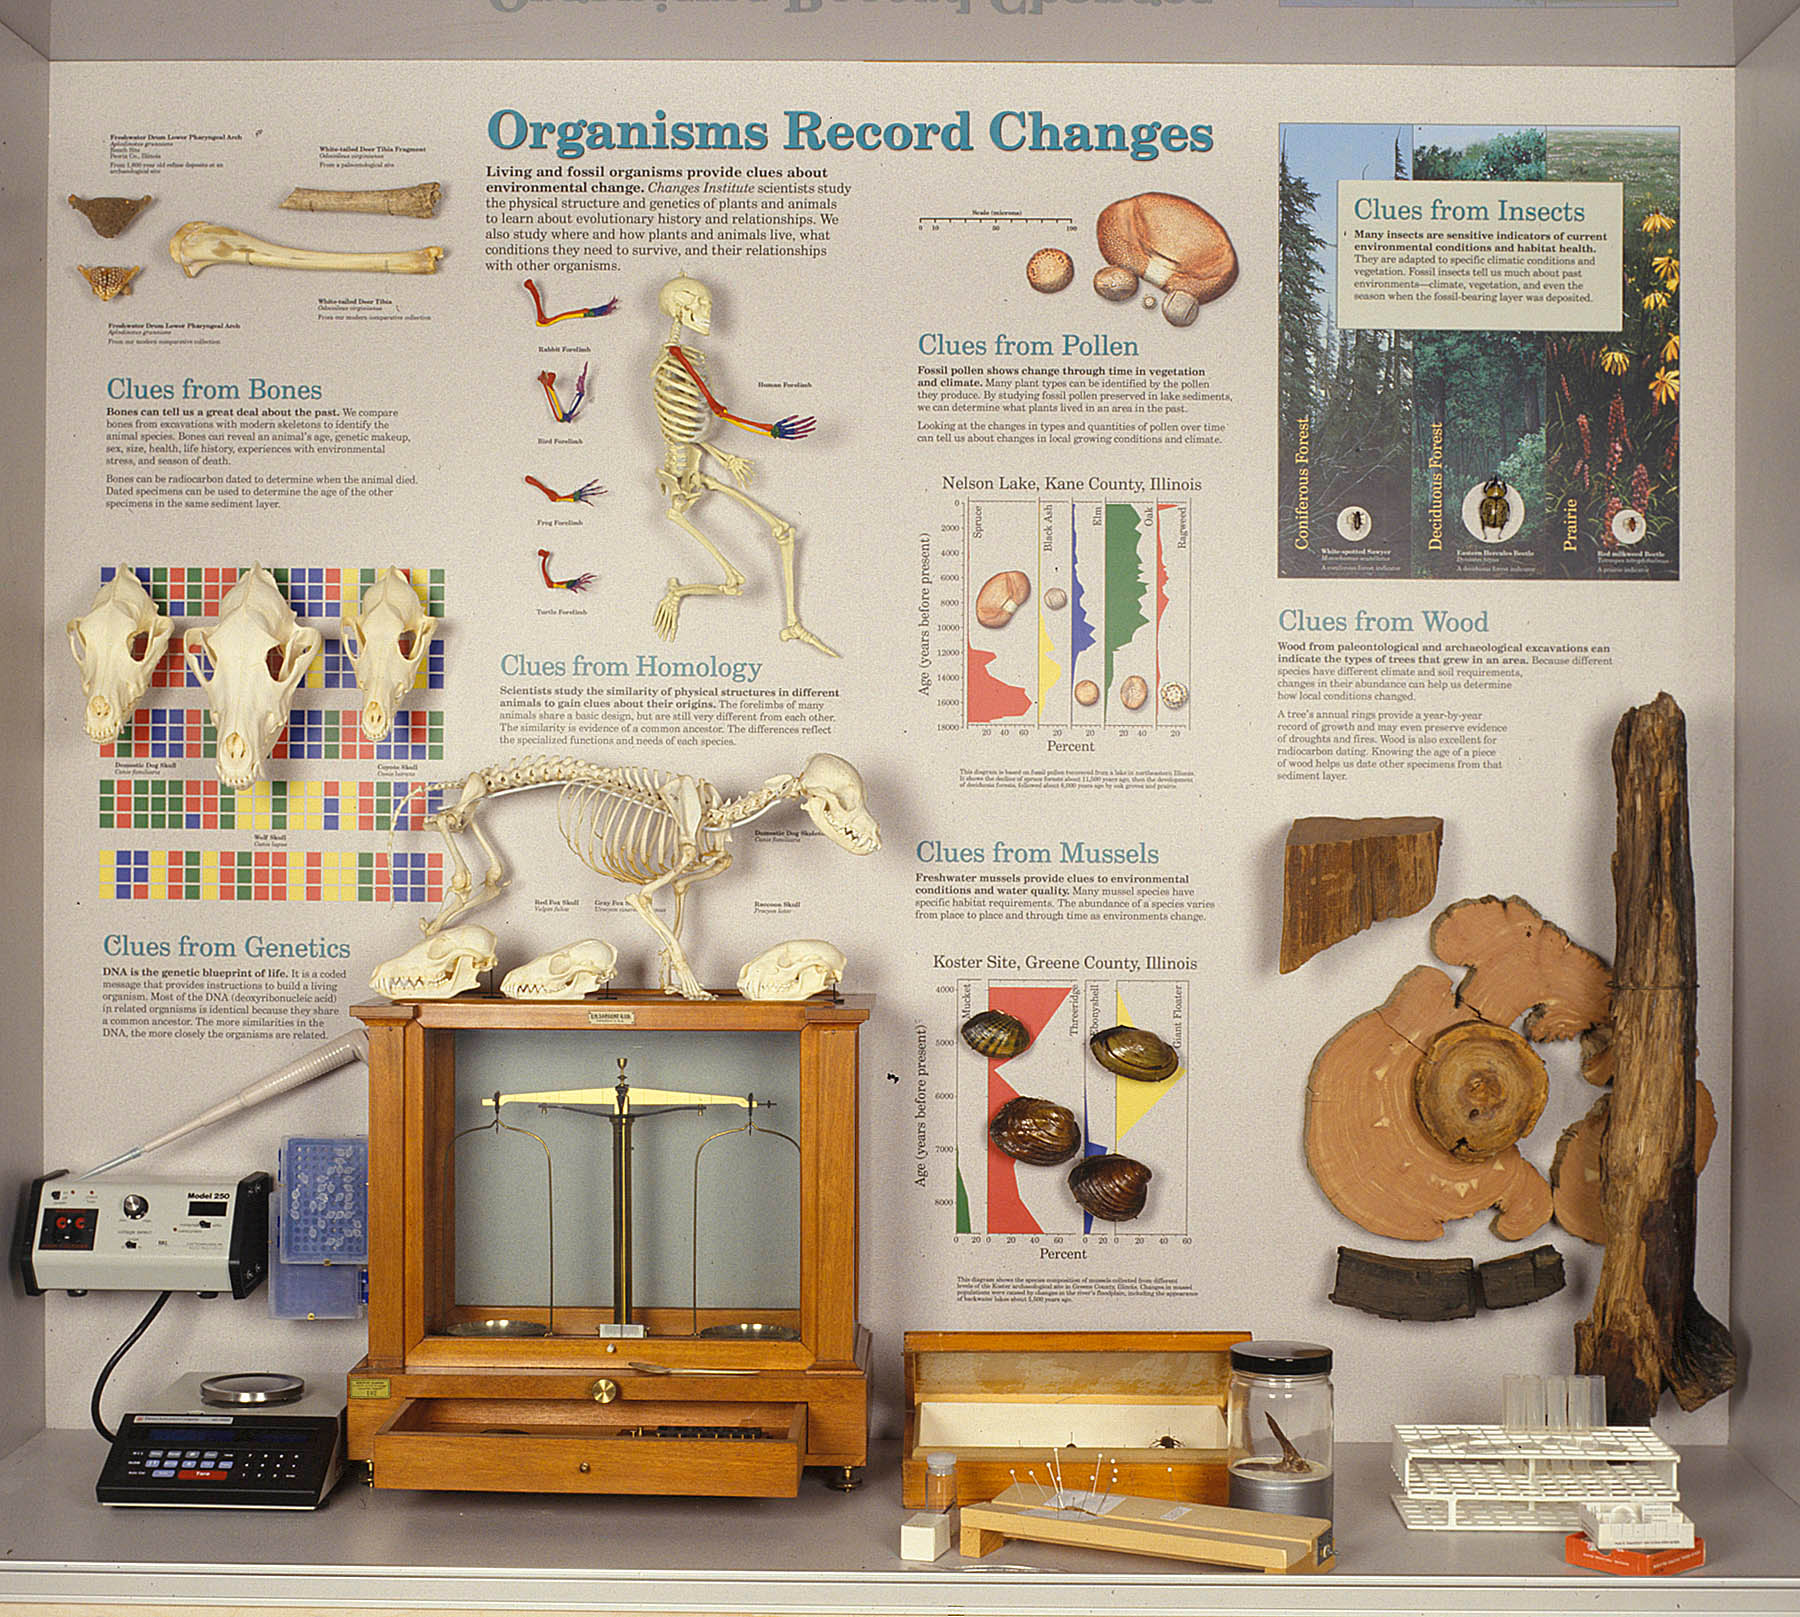 exhibit panel on the biological record